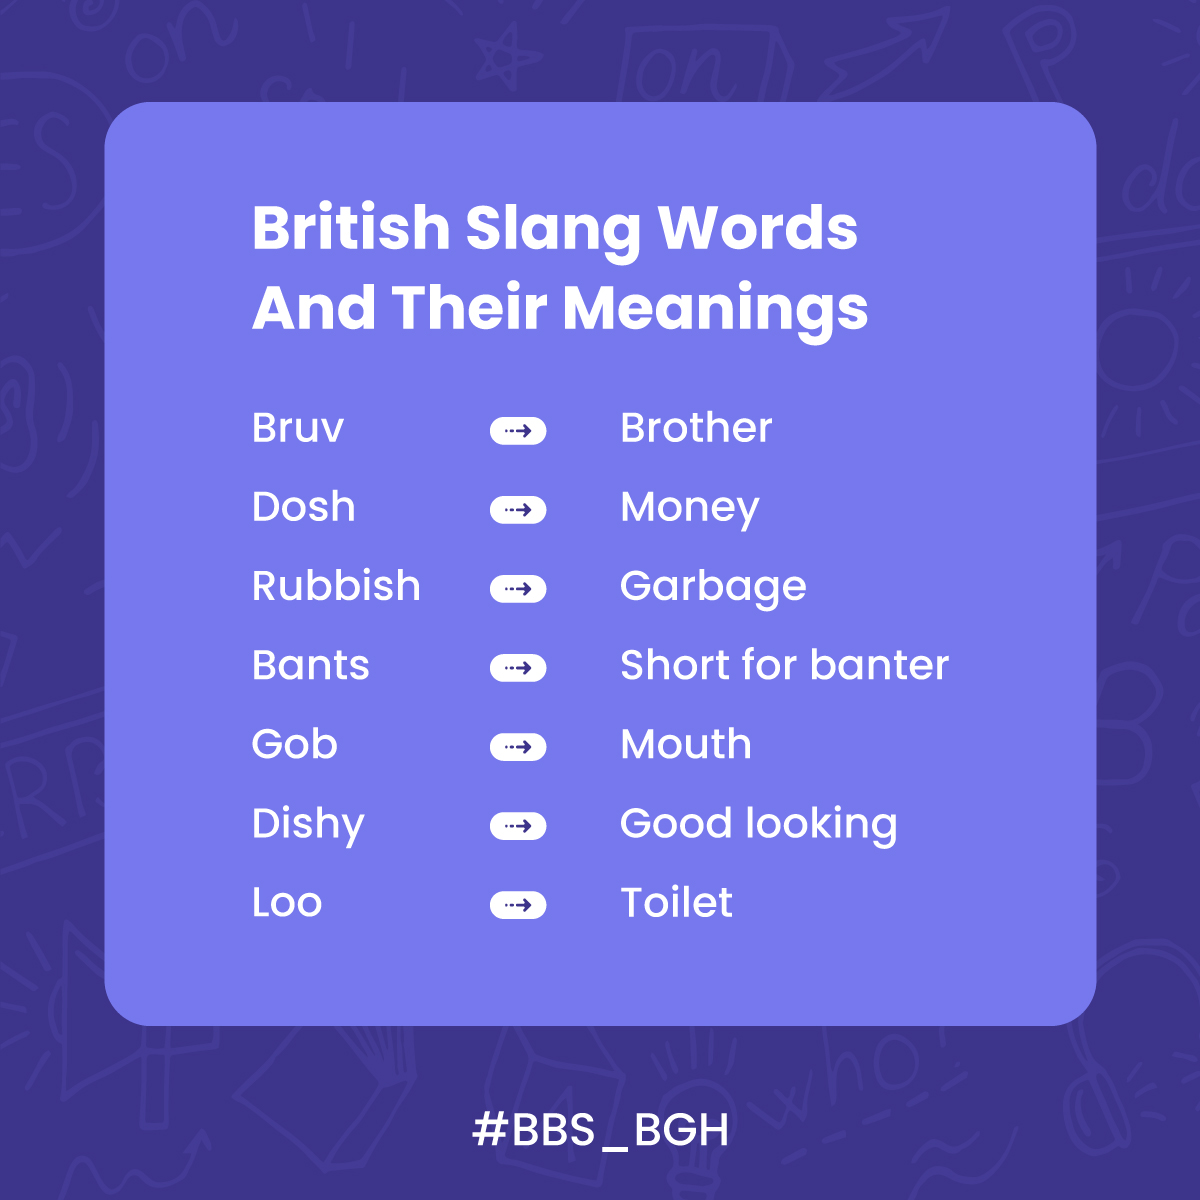 Let's unlock the Brit-speak!
Check out these delightful British slang words.

Want to add more such words to the list? Comment now!

#BritishSlang #Words #LearnEnglish #English #Vocabulary #Words #Communication #BalBhartiSchool #BBS_BGH #Bahadurgarh